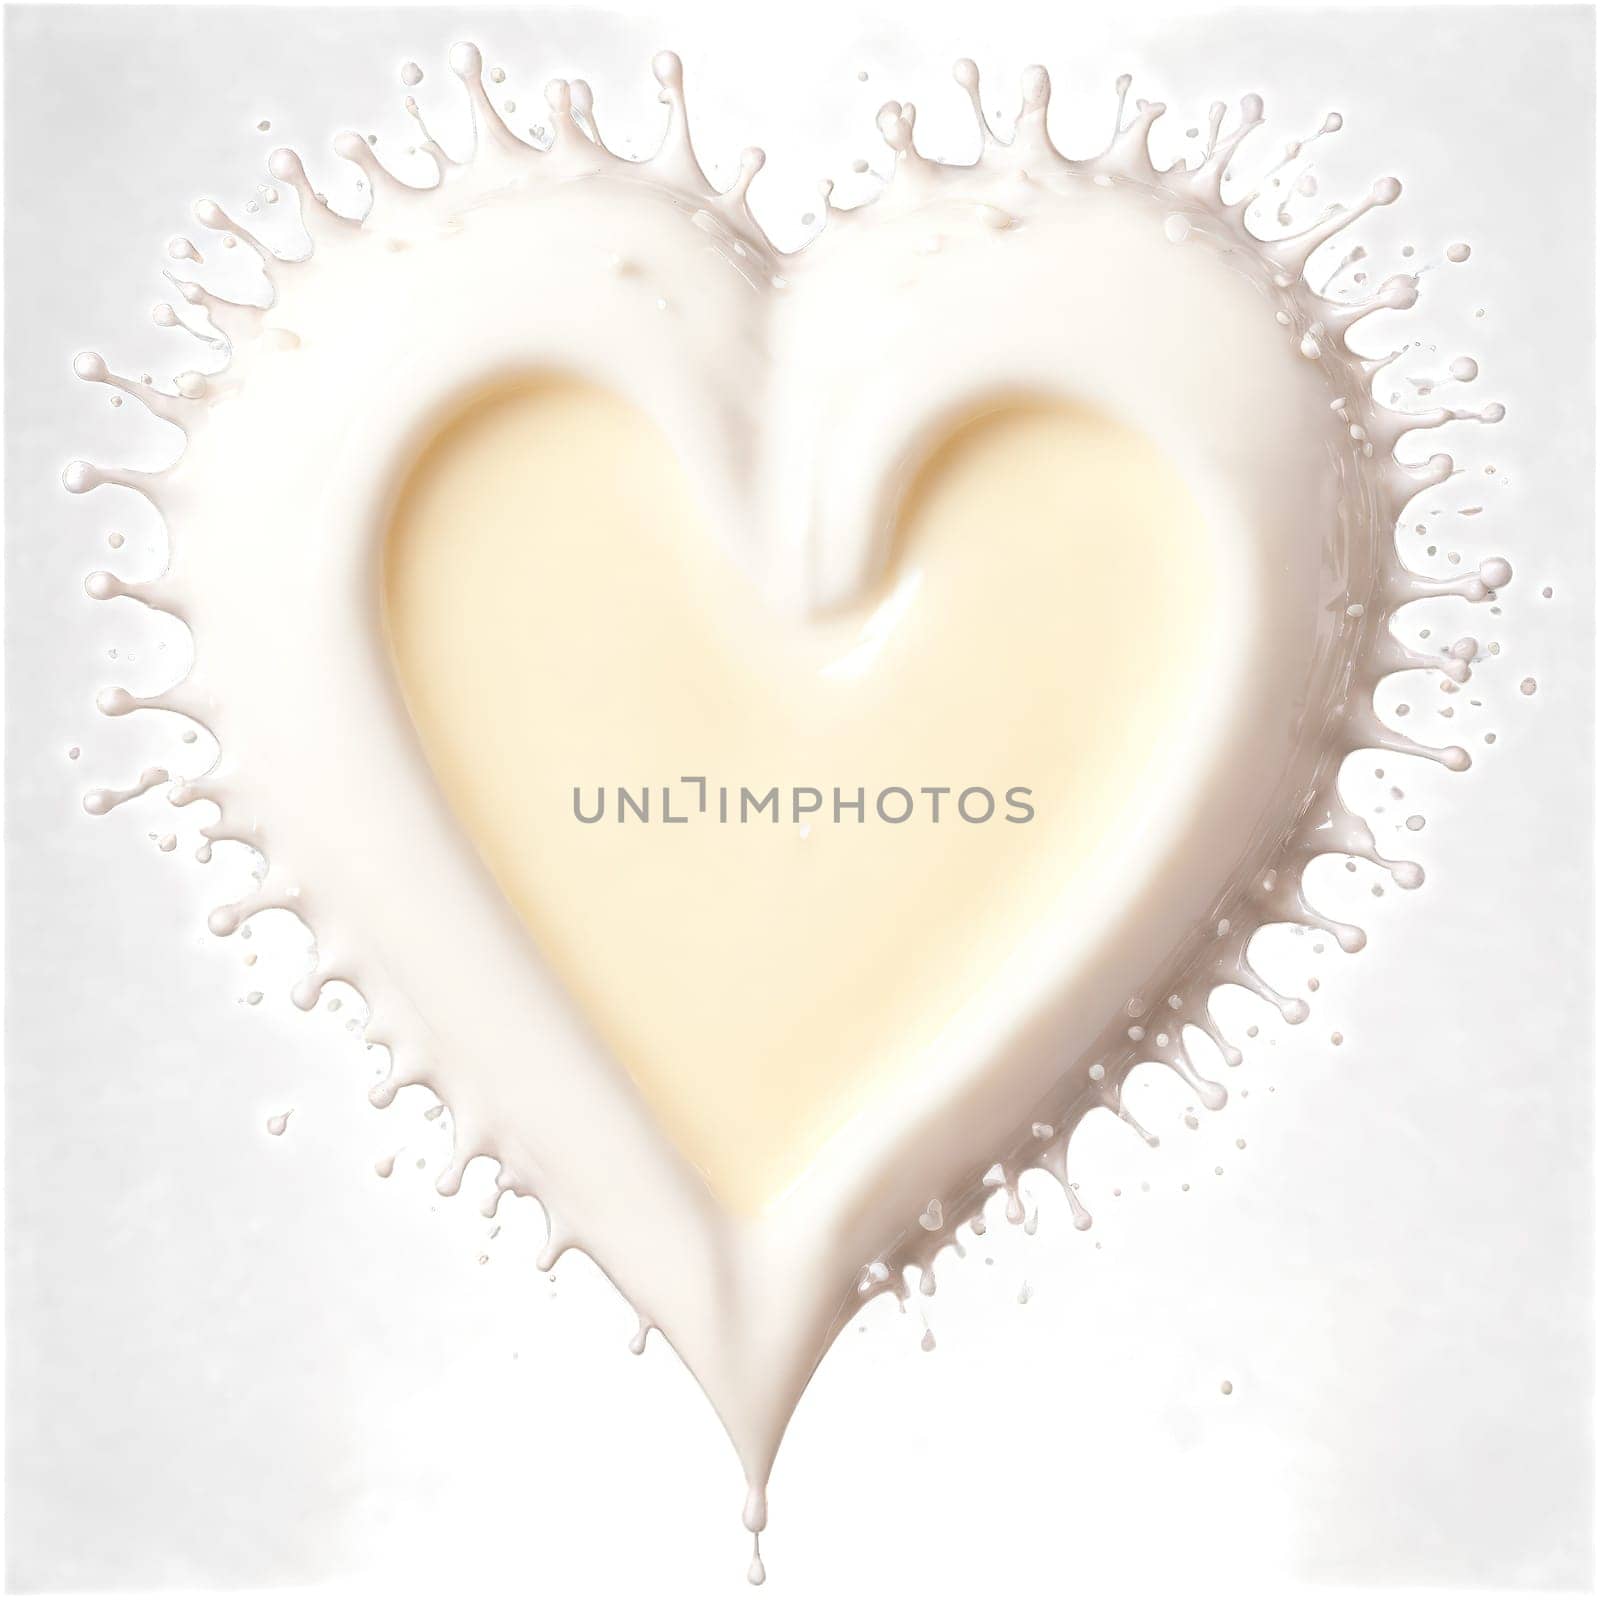 Heart of Love A heart symbol formed from milk splashes with droplets flying around by panophotograph